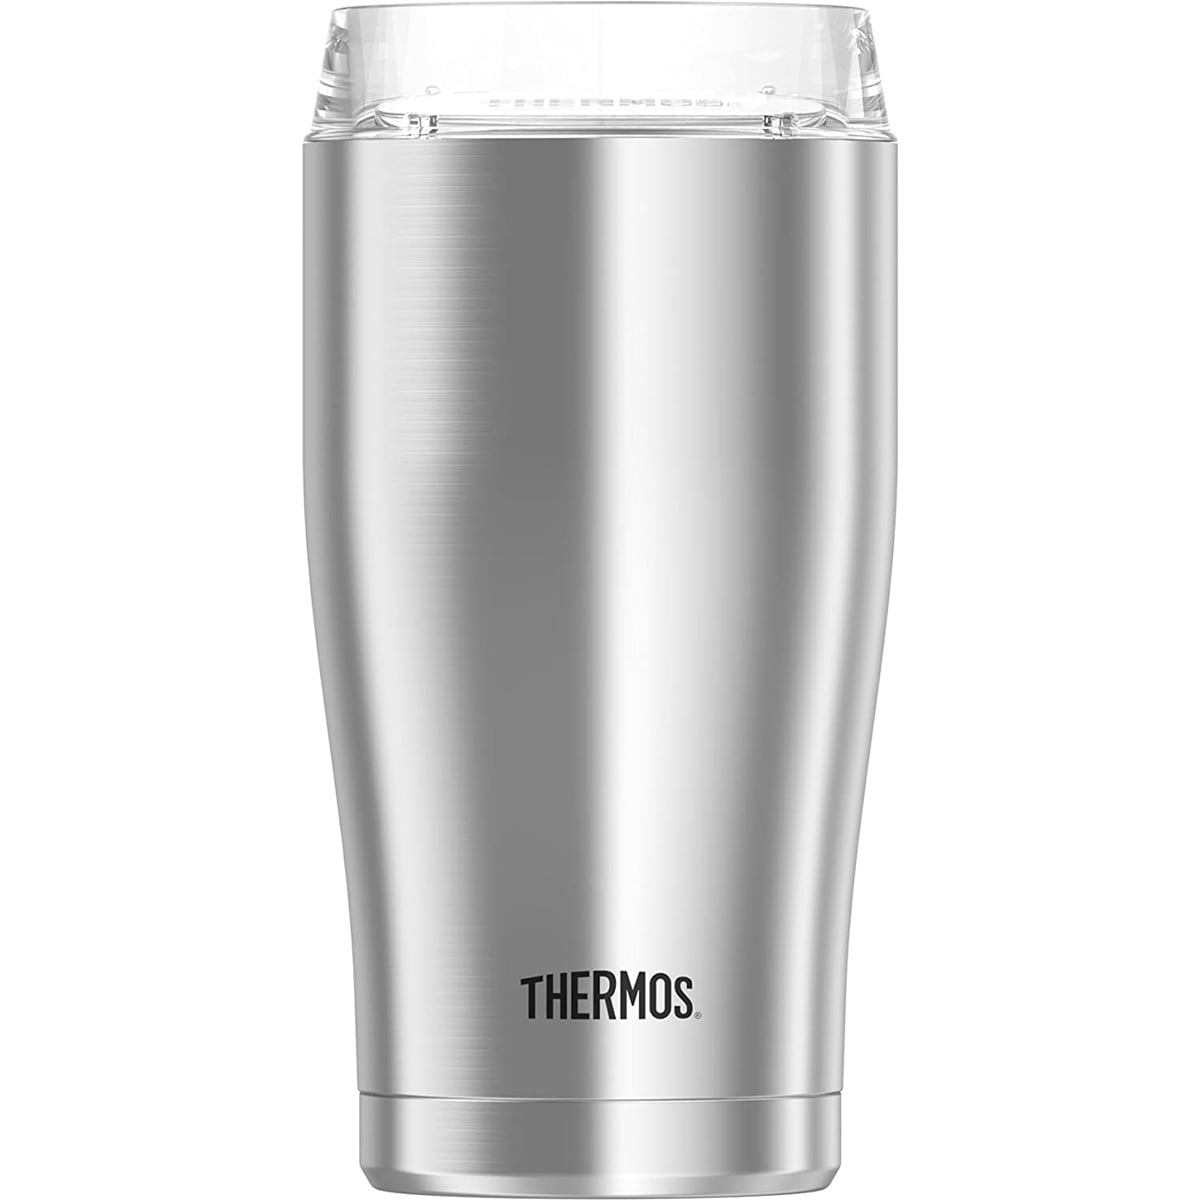 Thermos Stainless Steel Tumbler with 360 Drink Lid - Stainless Steel